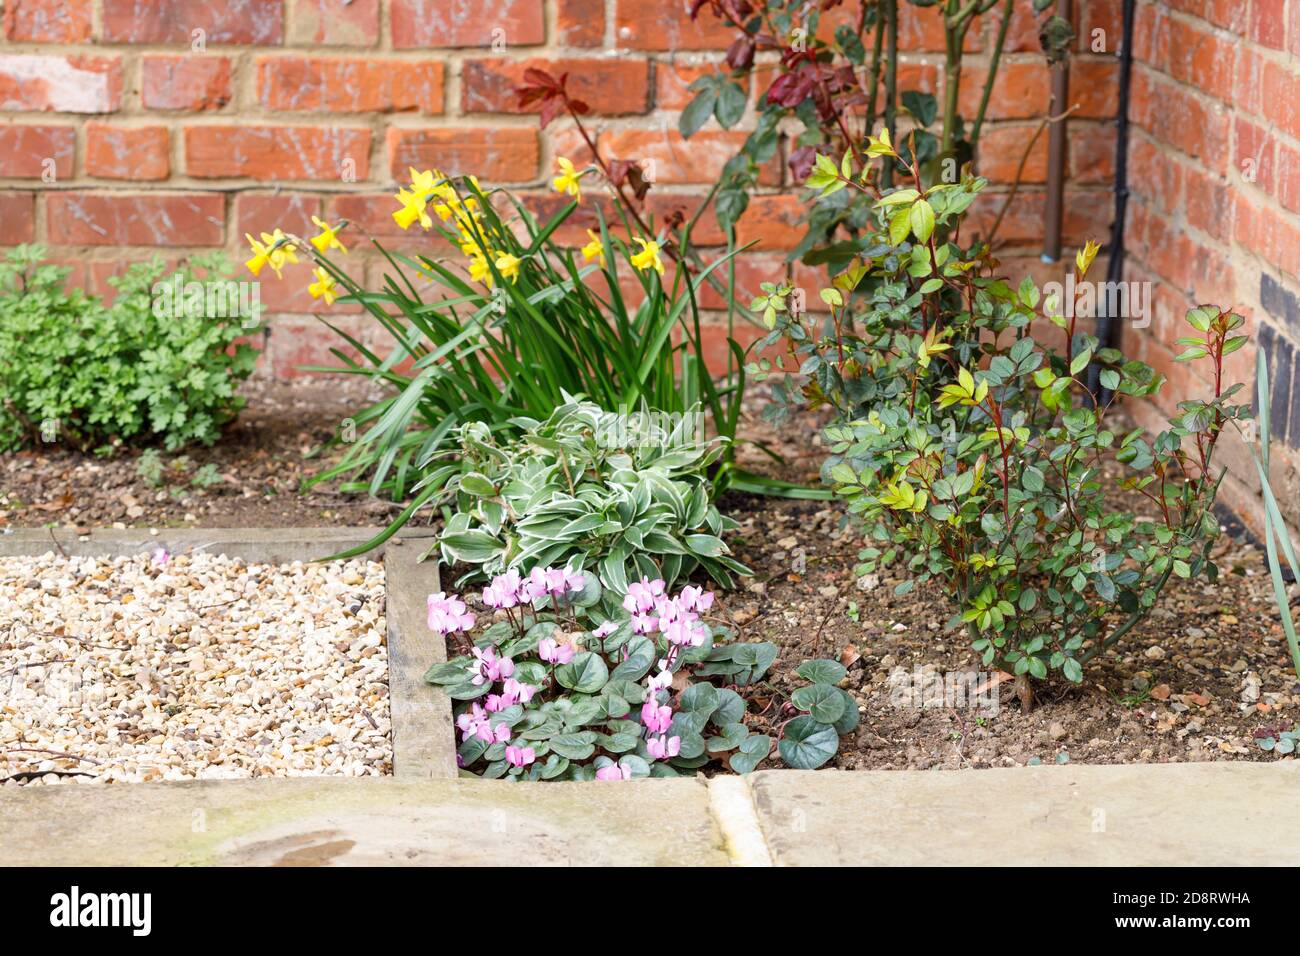 Spring flower border with bulbs and plants in a garden, UK Stock Photo